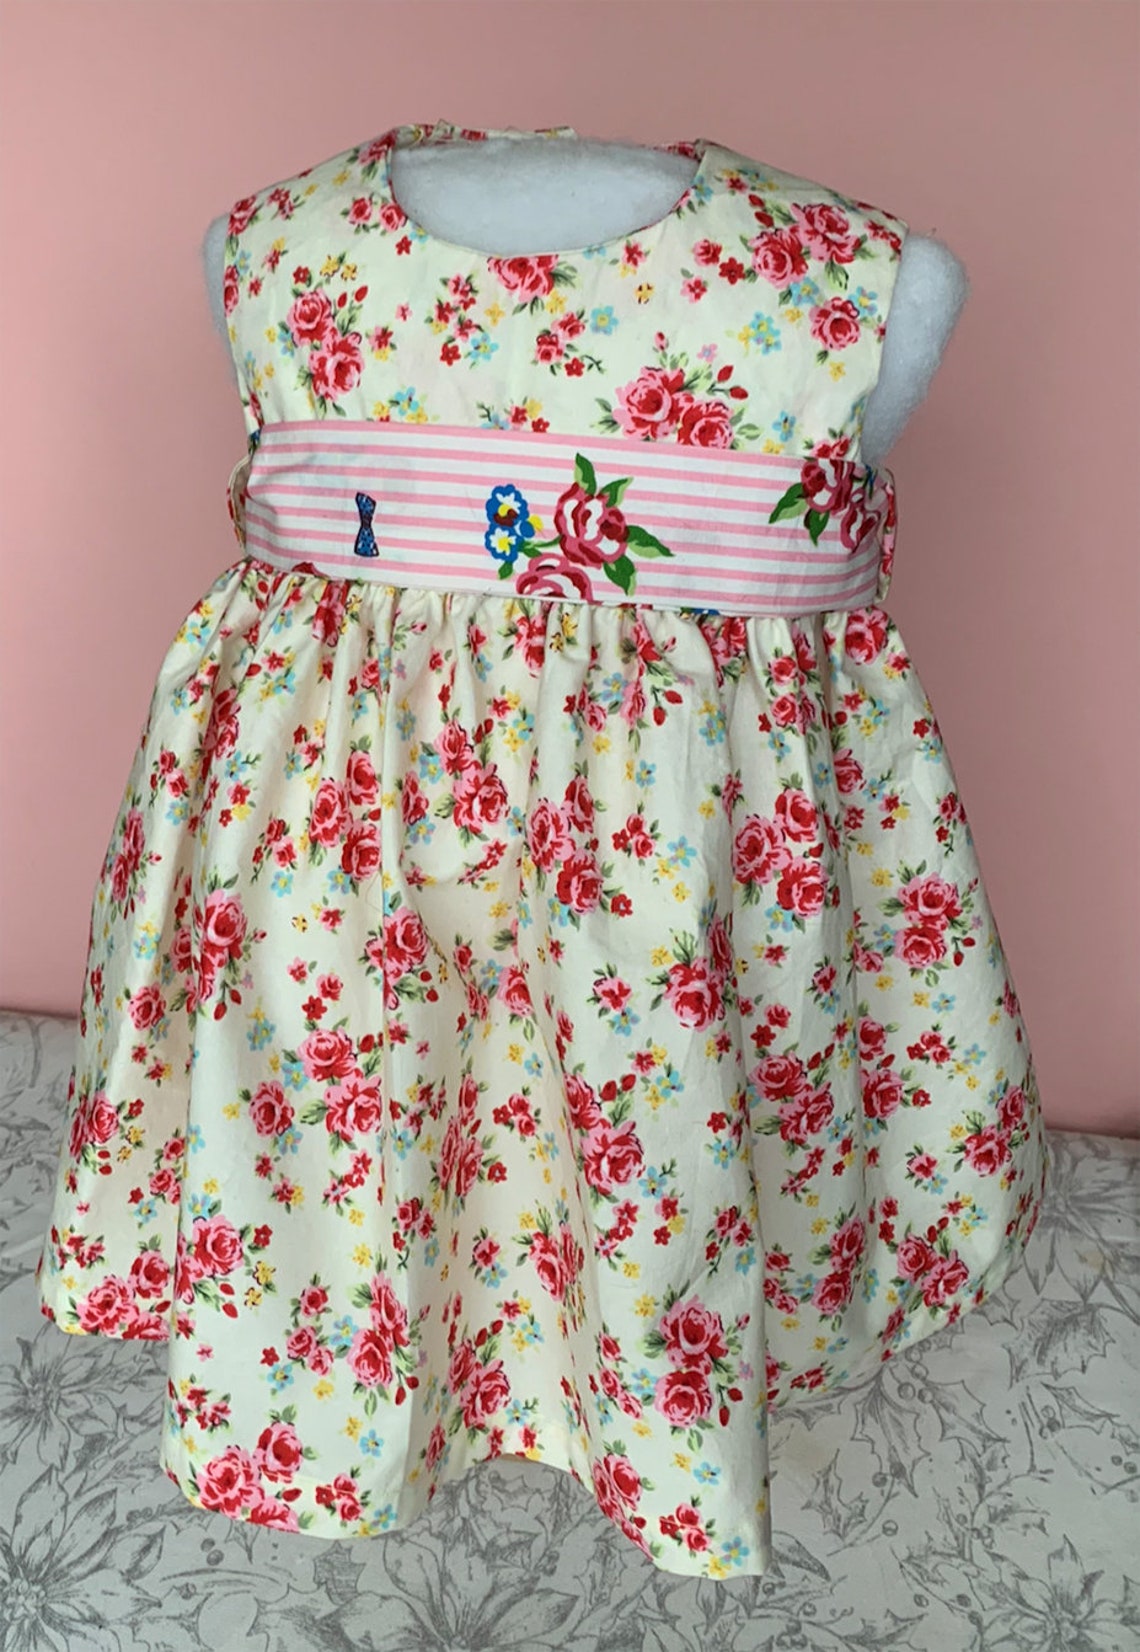 PRETTY BABY GIRL Dress. 3-6 Months. Party or Special Occasion - Etsy